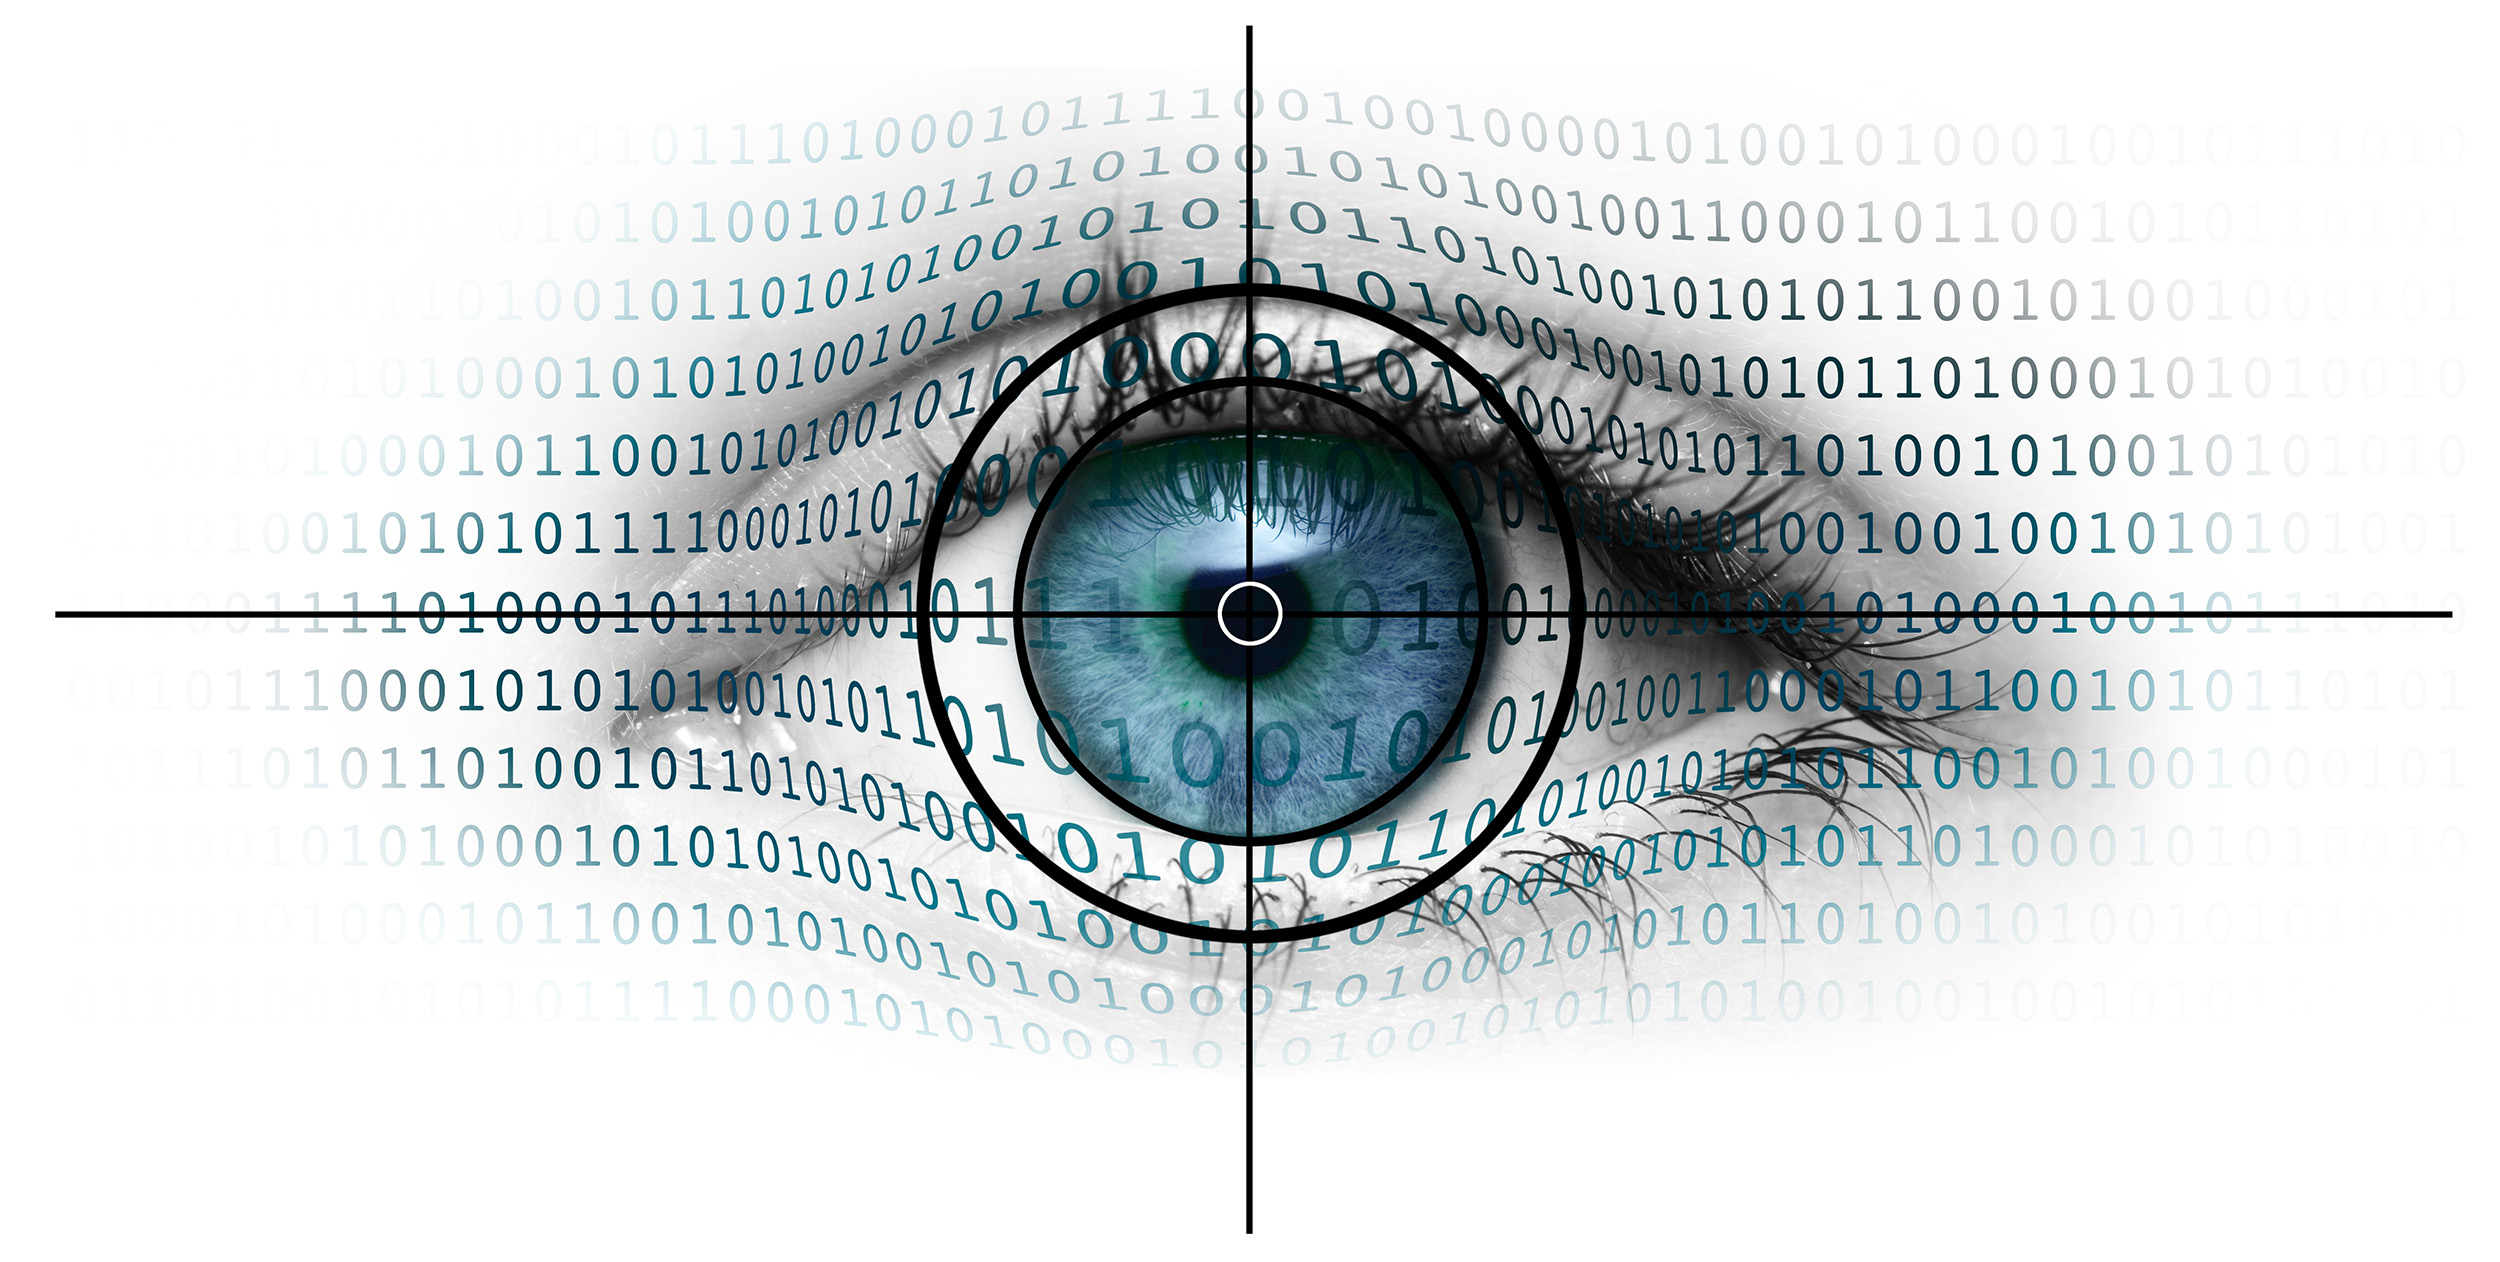 Blue eye above which a “targeting” can be seen as well as strings of zeros and ones.